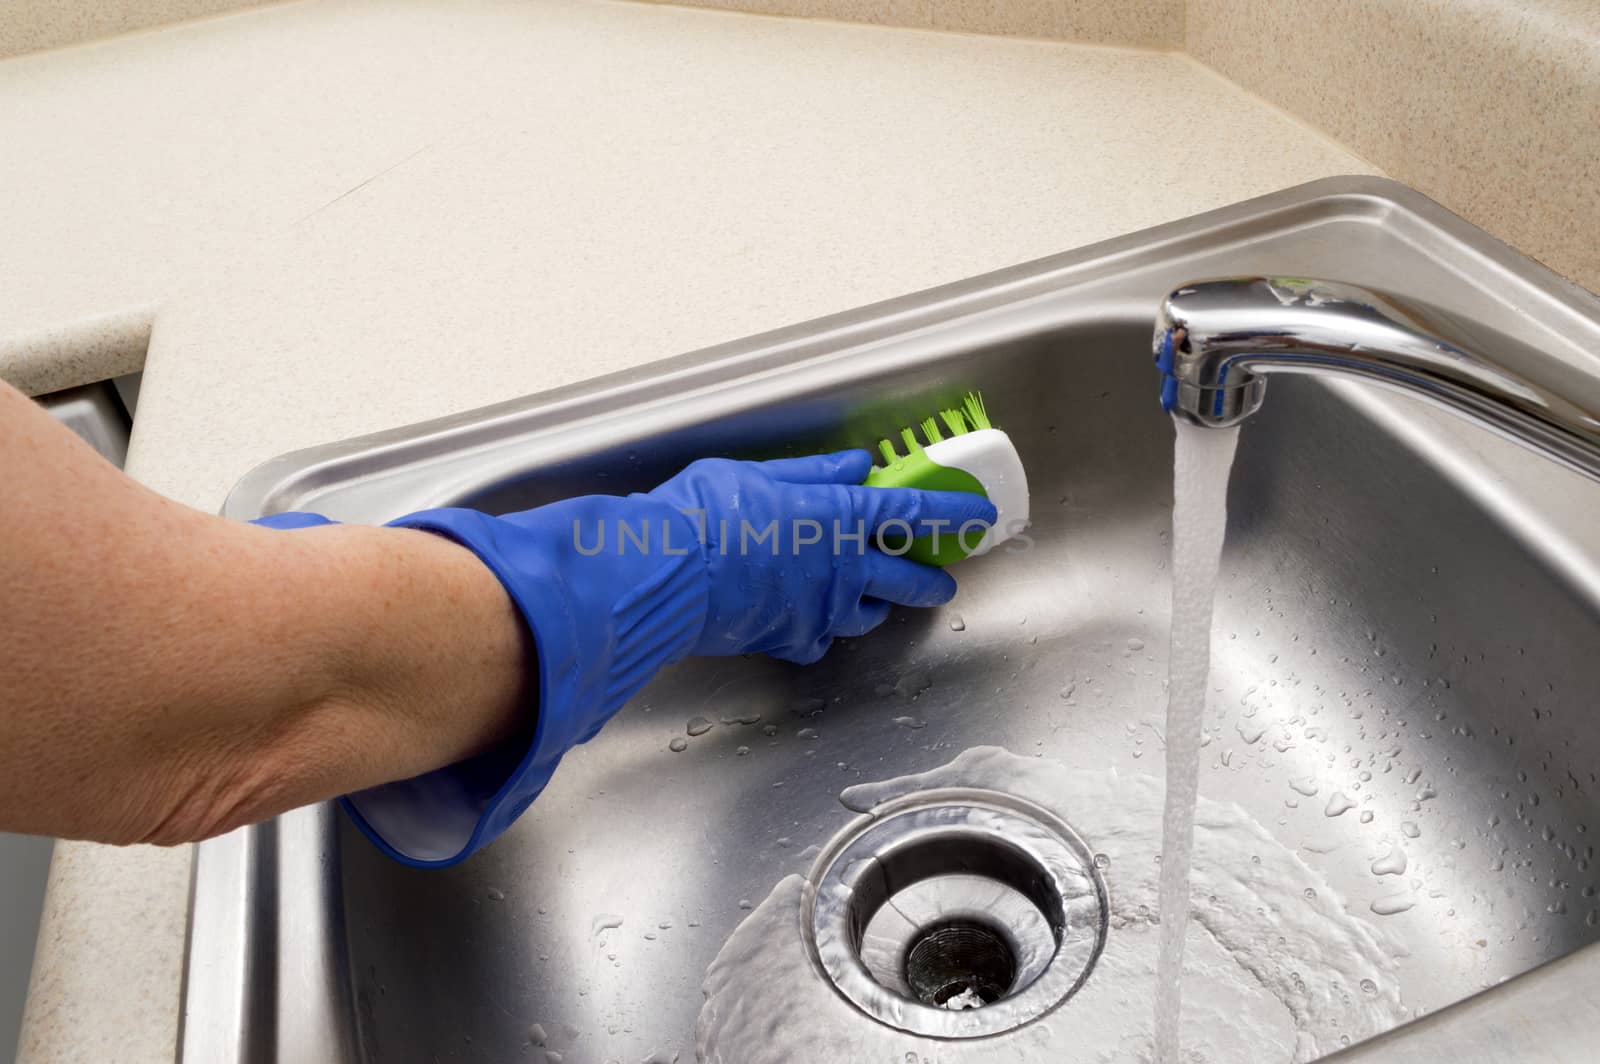 Hands wearing rubber gloves cleaning stainless steel sink.